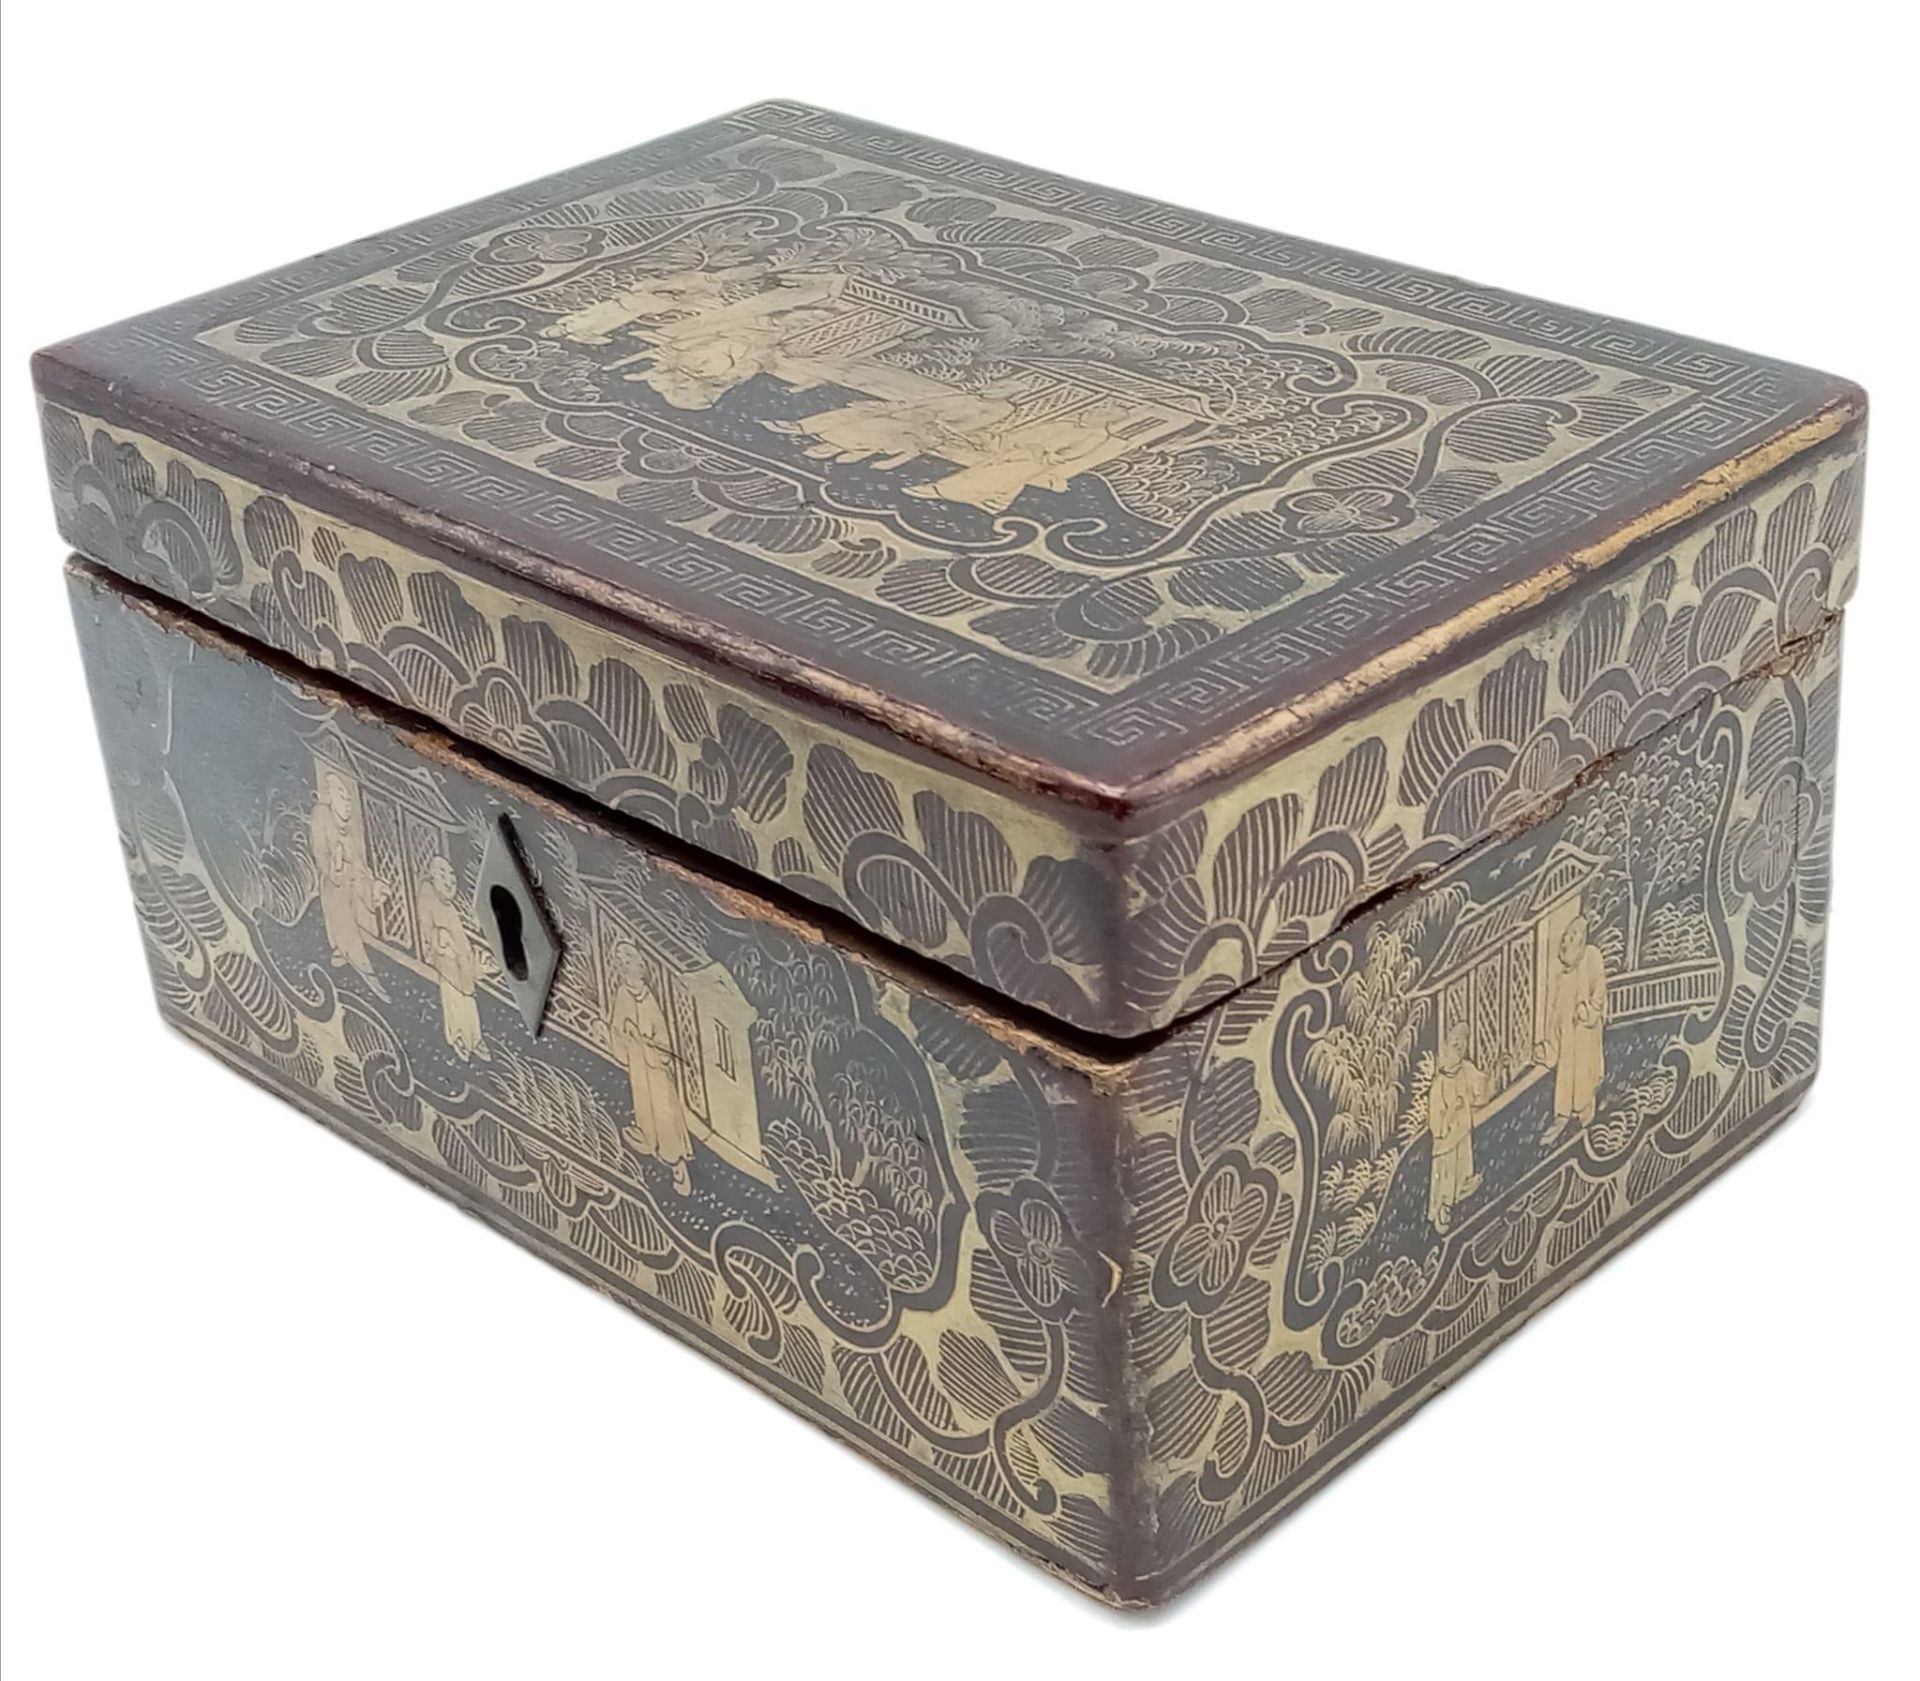 An Antique, Late 18th Century Chinese Lacquer Tea Caddy/Jewellery Box. Wonderful gilding depicting - Image 2 of 7